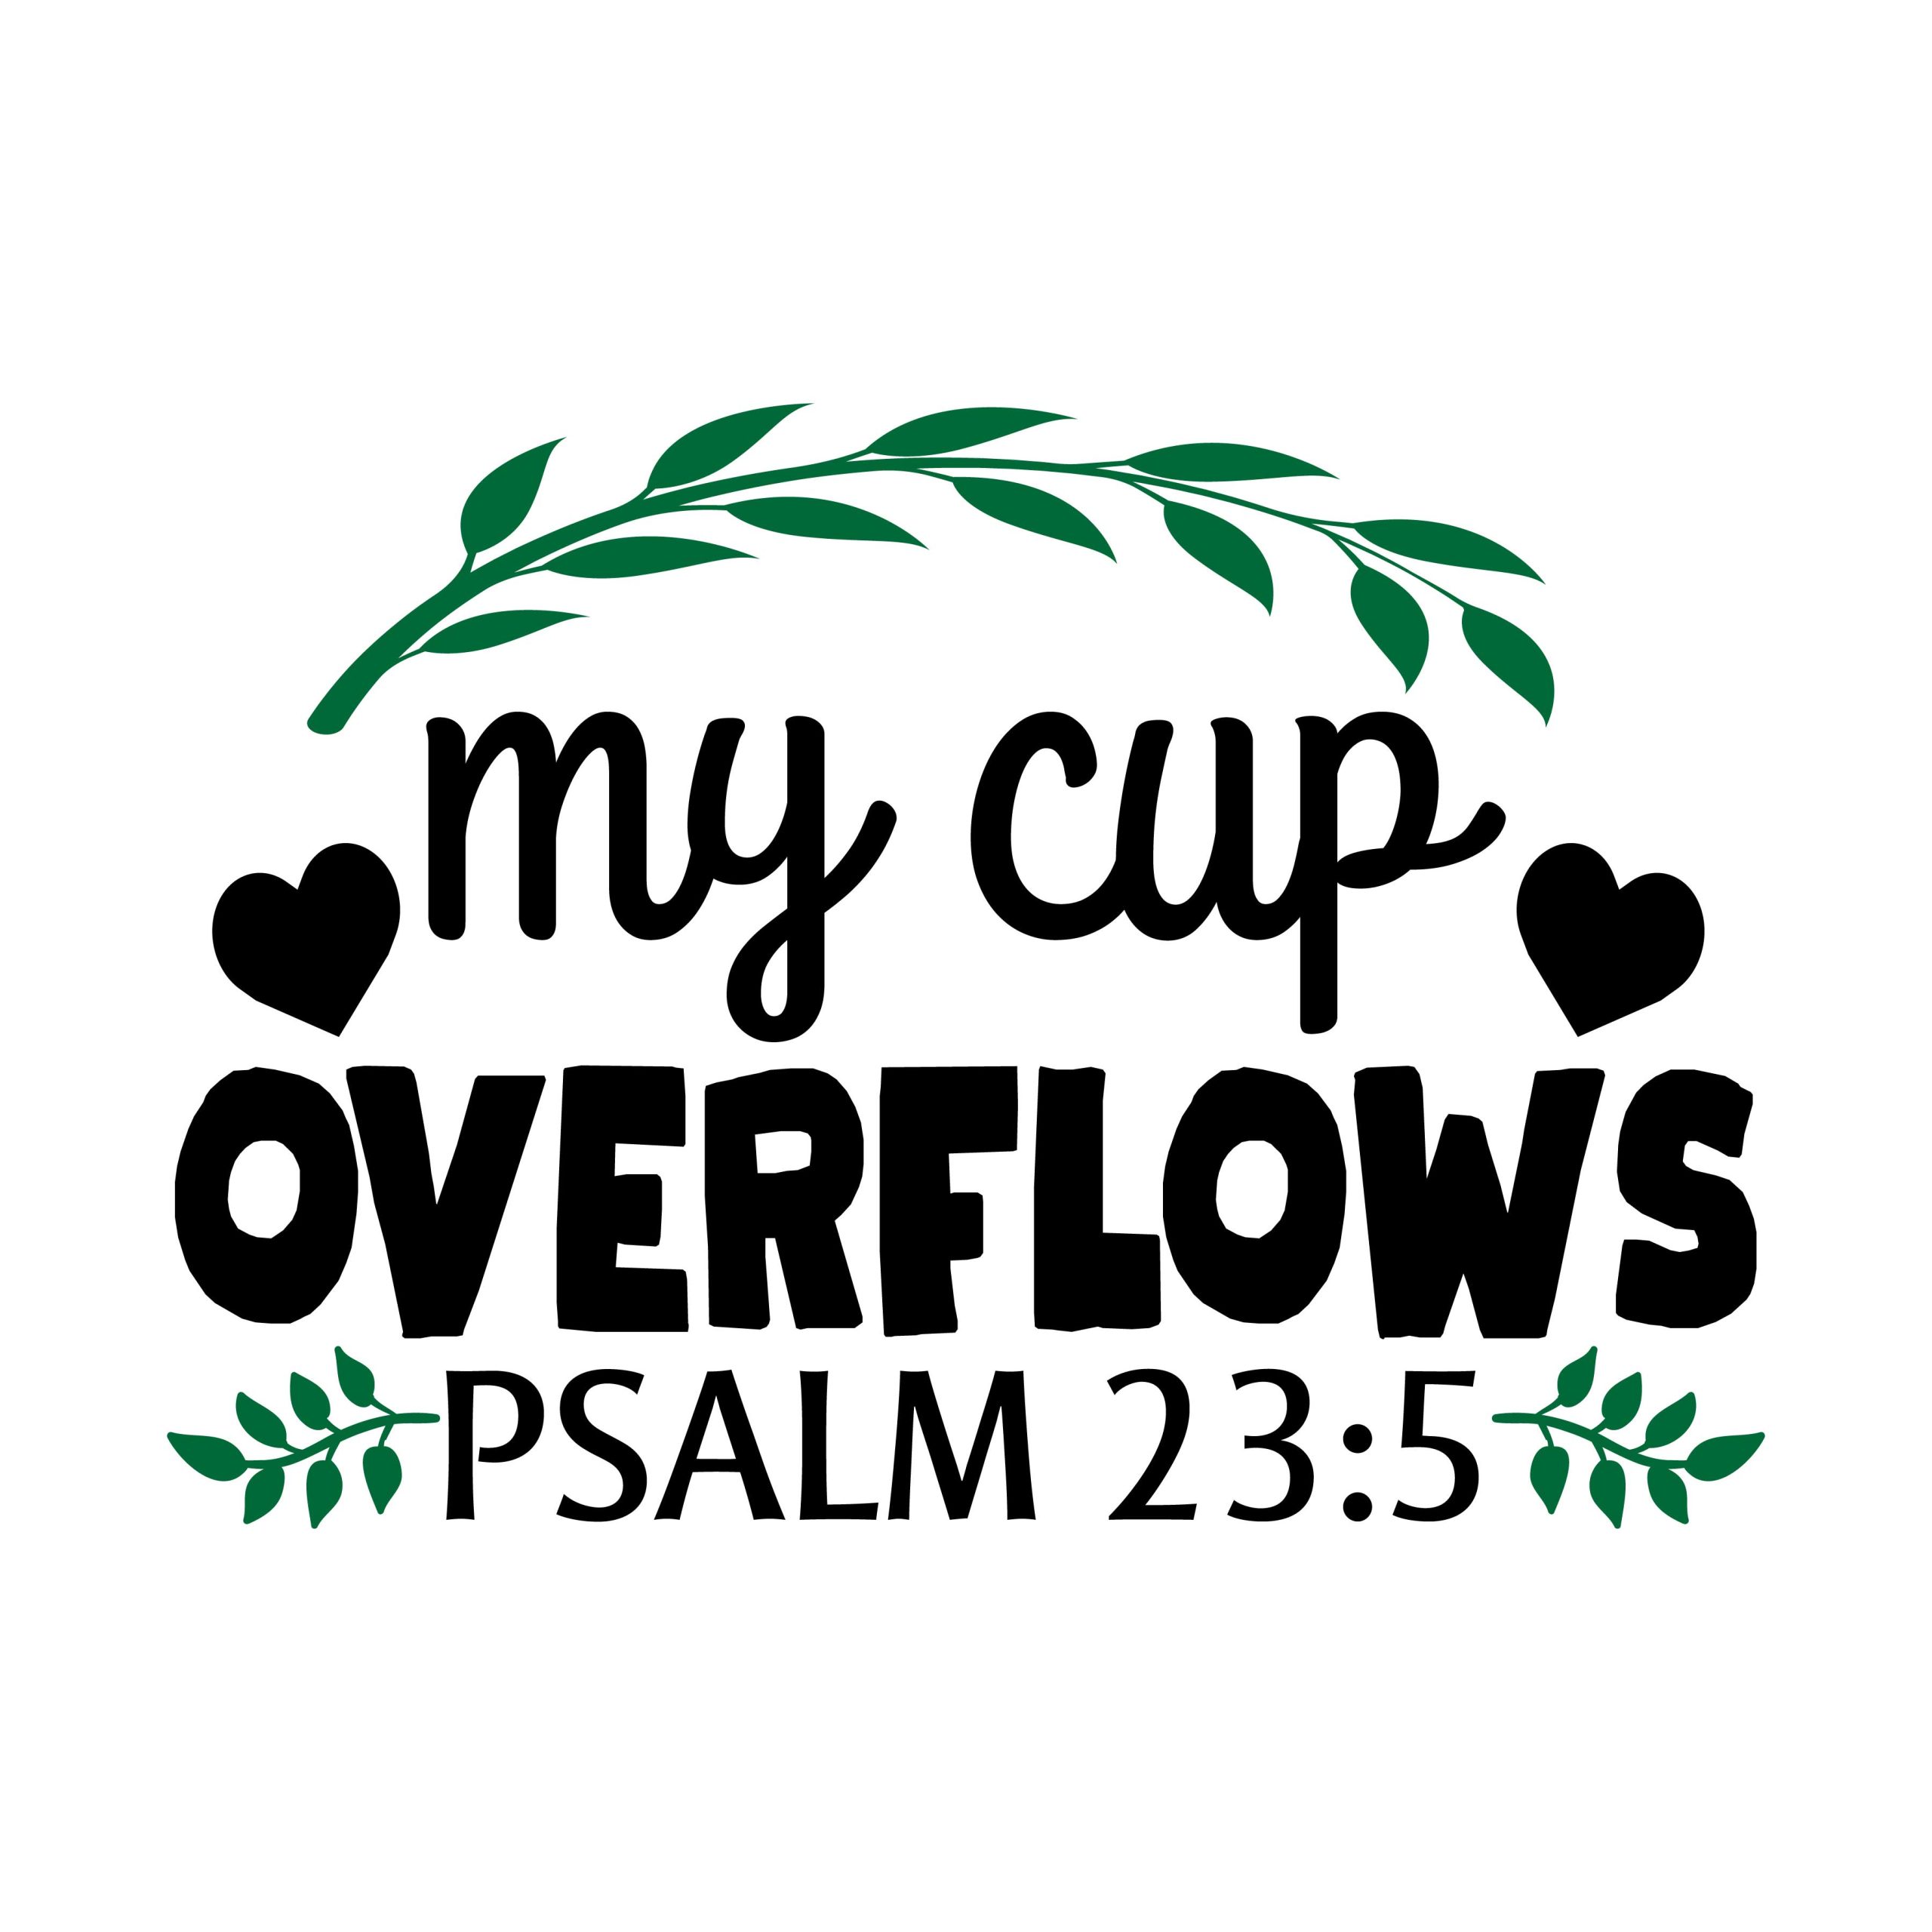 My cup overflows Psalm 23:5, bible verses, scripture verses, svg files, passages, sayings, cricut designs, silhouette, embroidery, bundle, free cut files, design space, vector